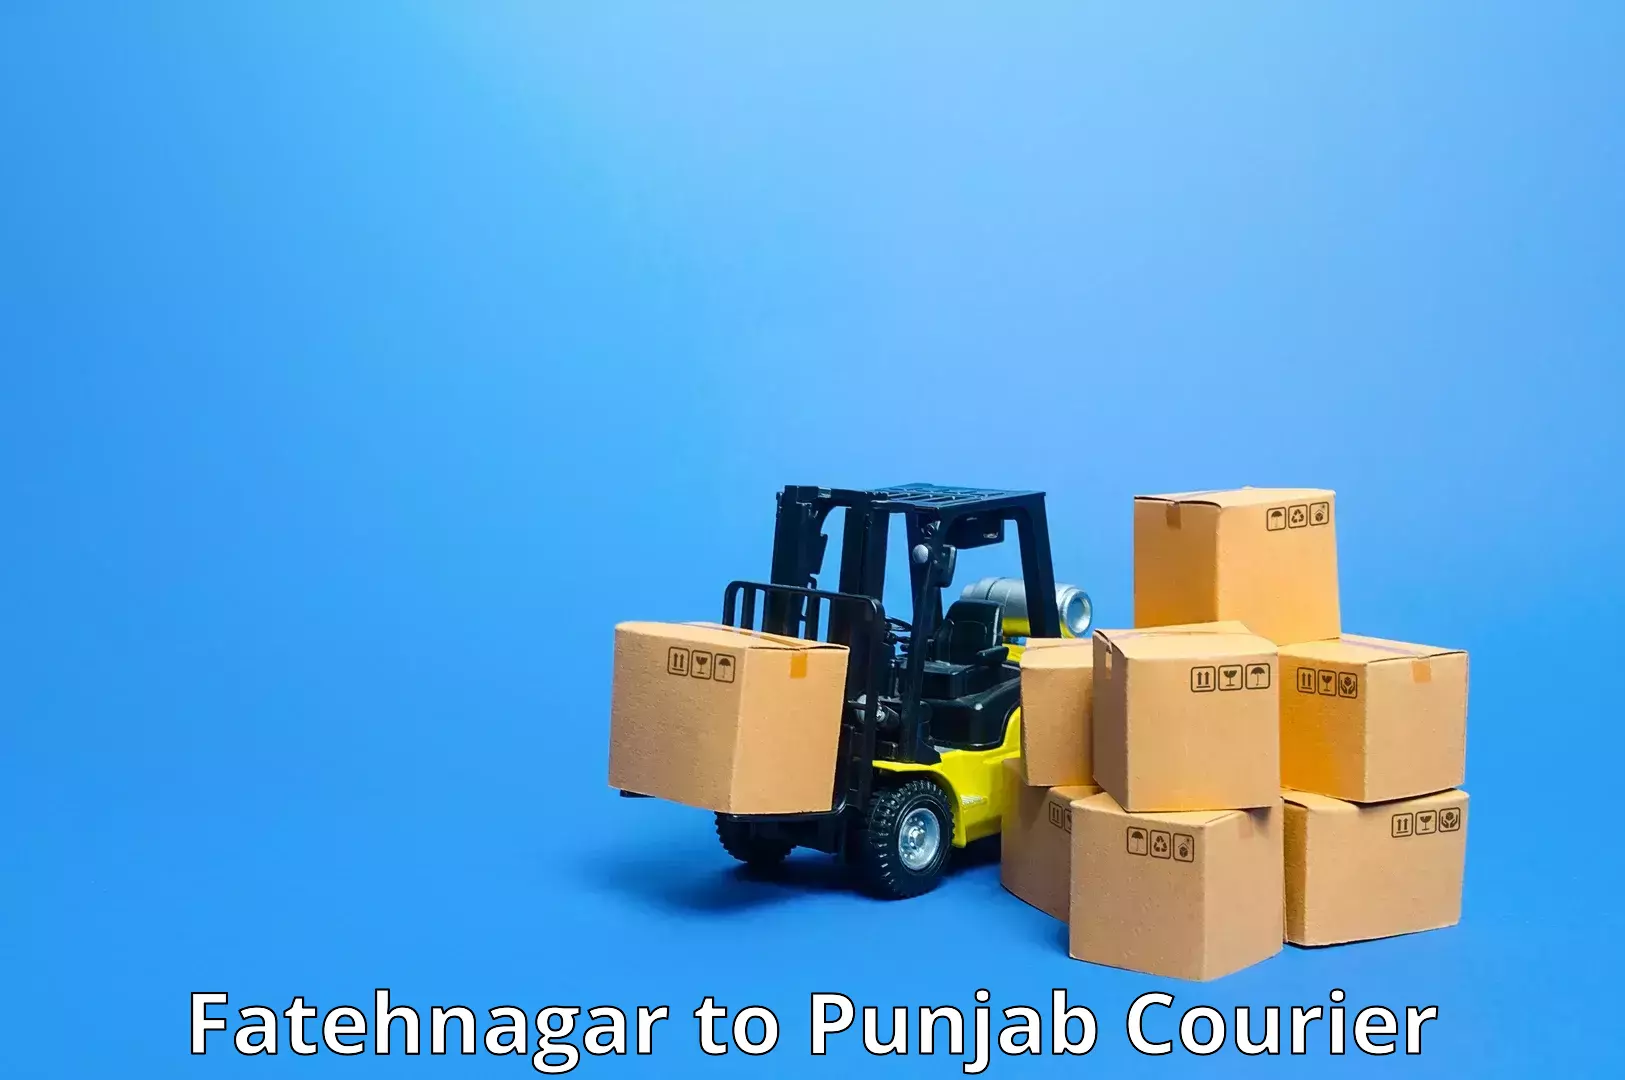 User-friendly delivery service Fatehnagar to Punjab